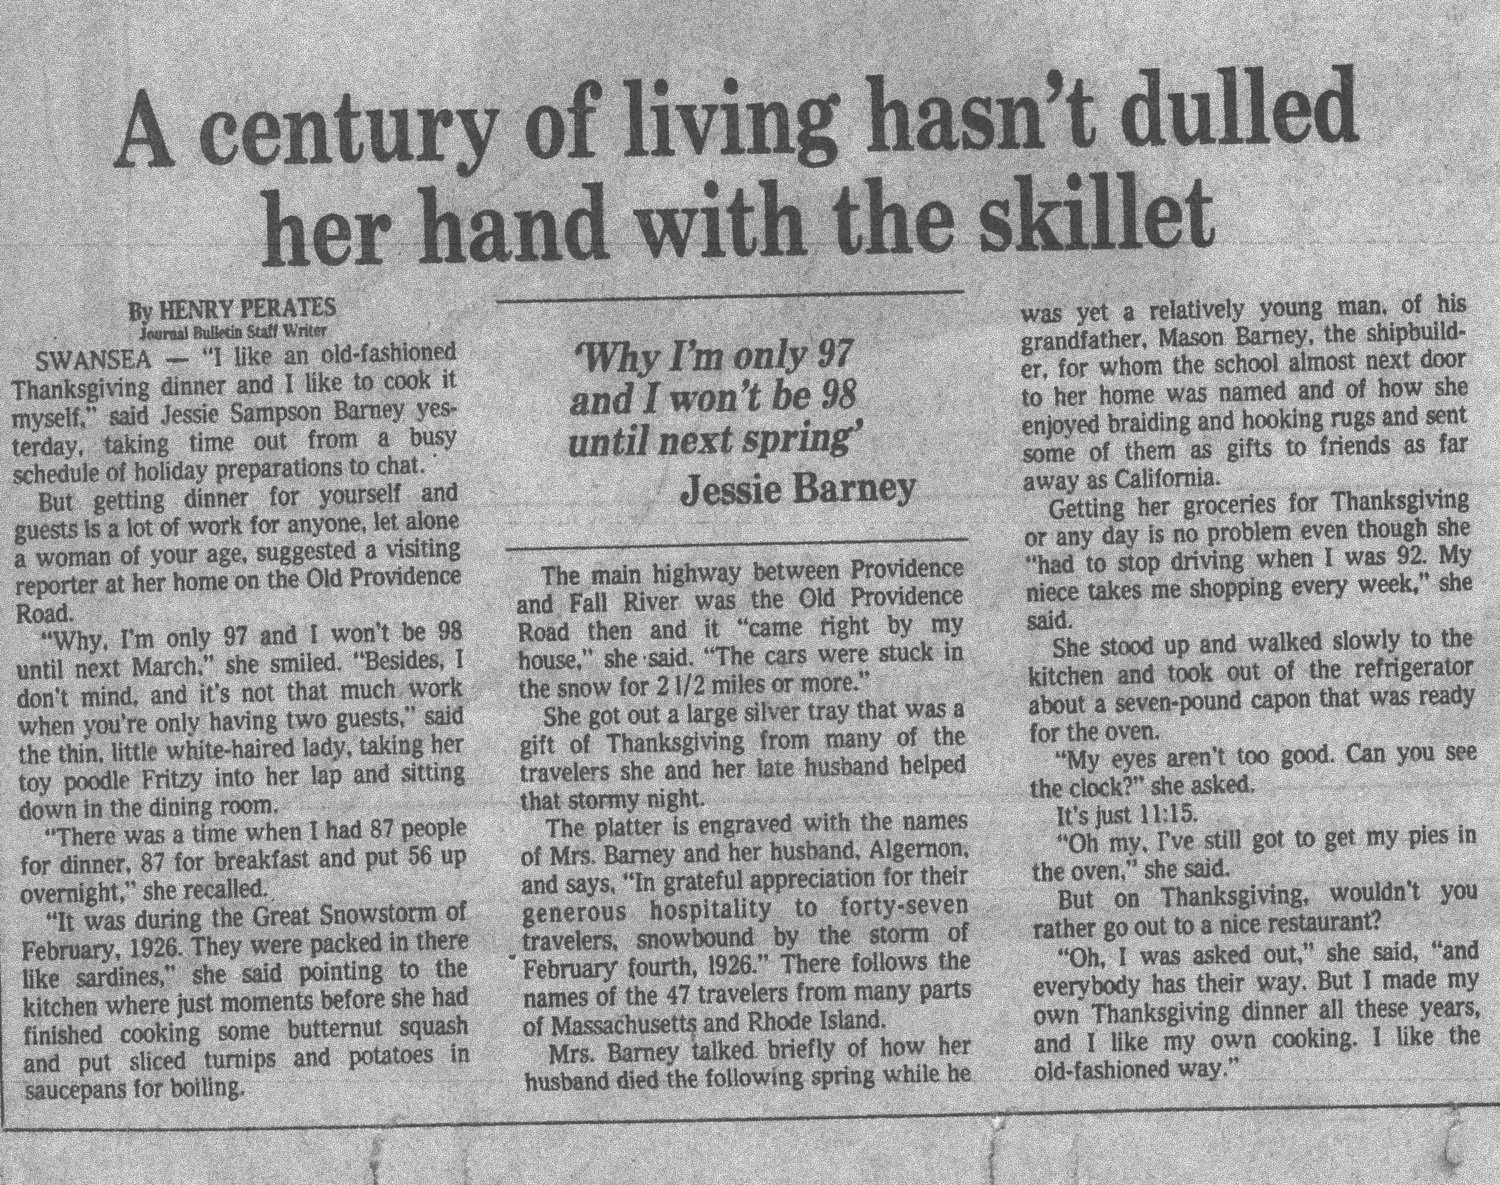 A century of living hasn't dulled her hand with the skillet from The Journal Bulletin